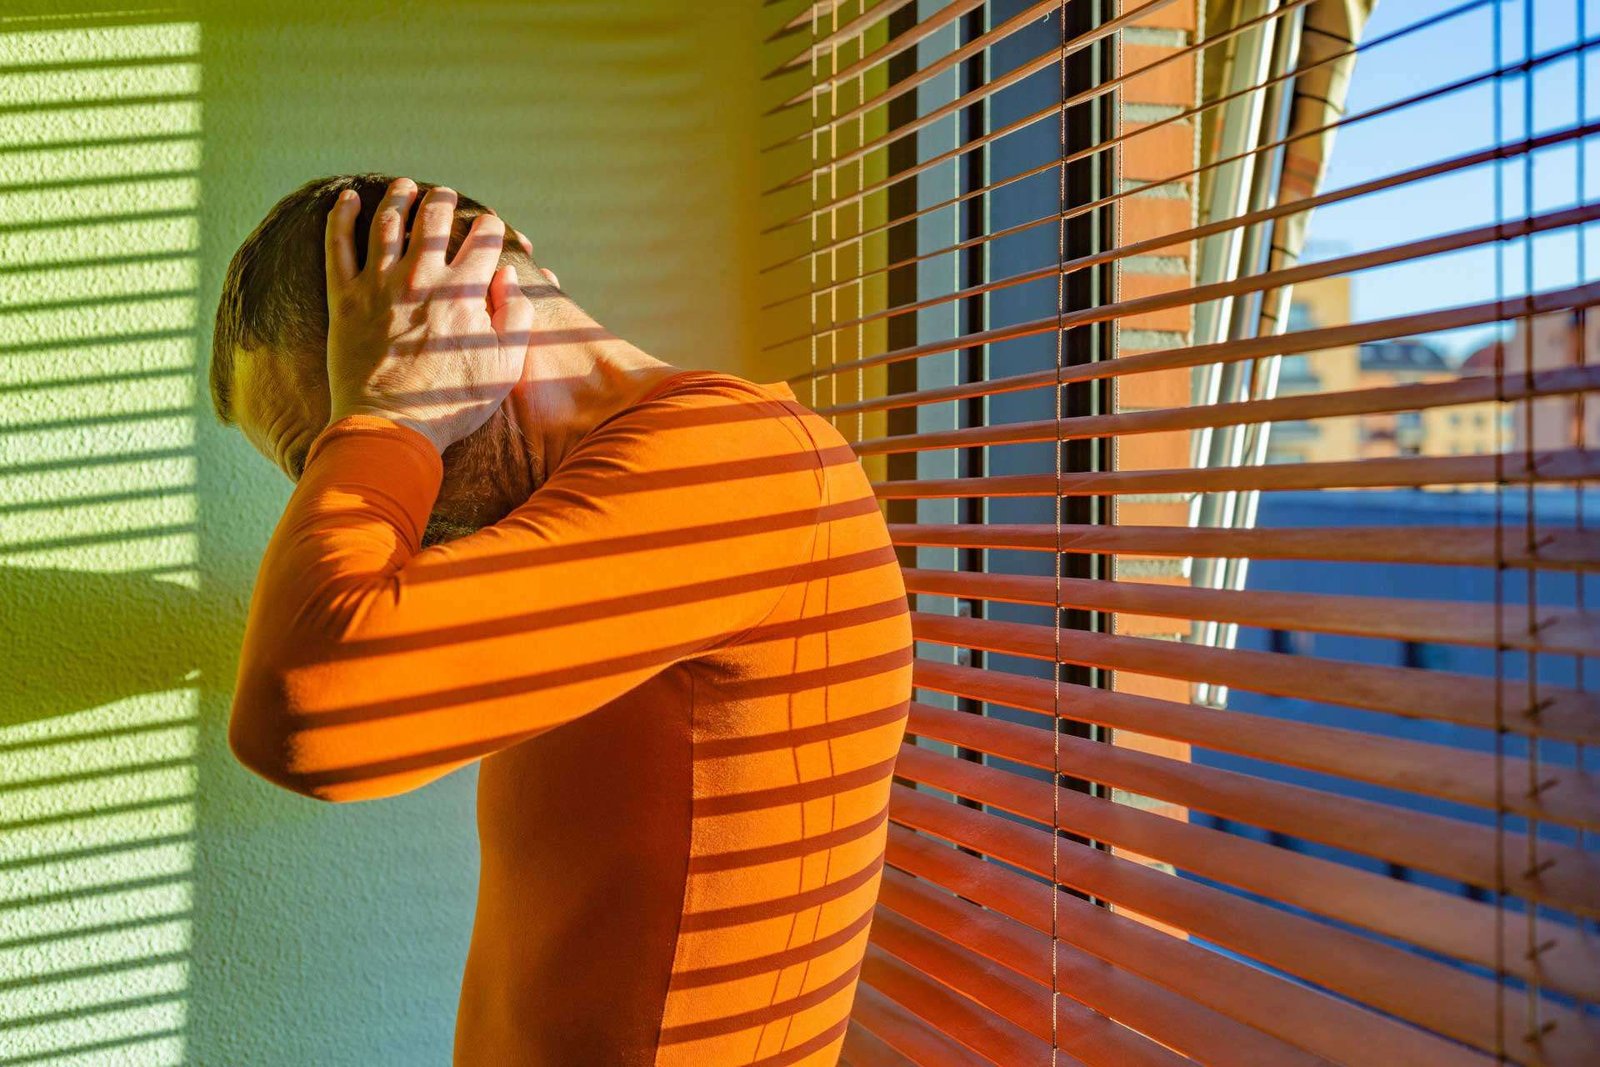 Distressed man with hands on head wearing an orange long-sleeved shirt standing by a window with venetian blinds